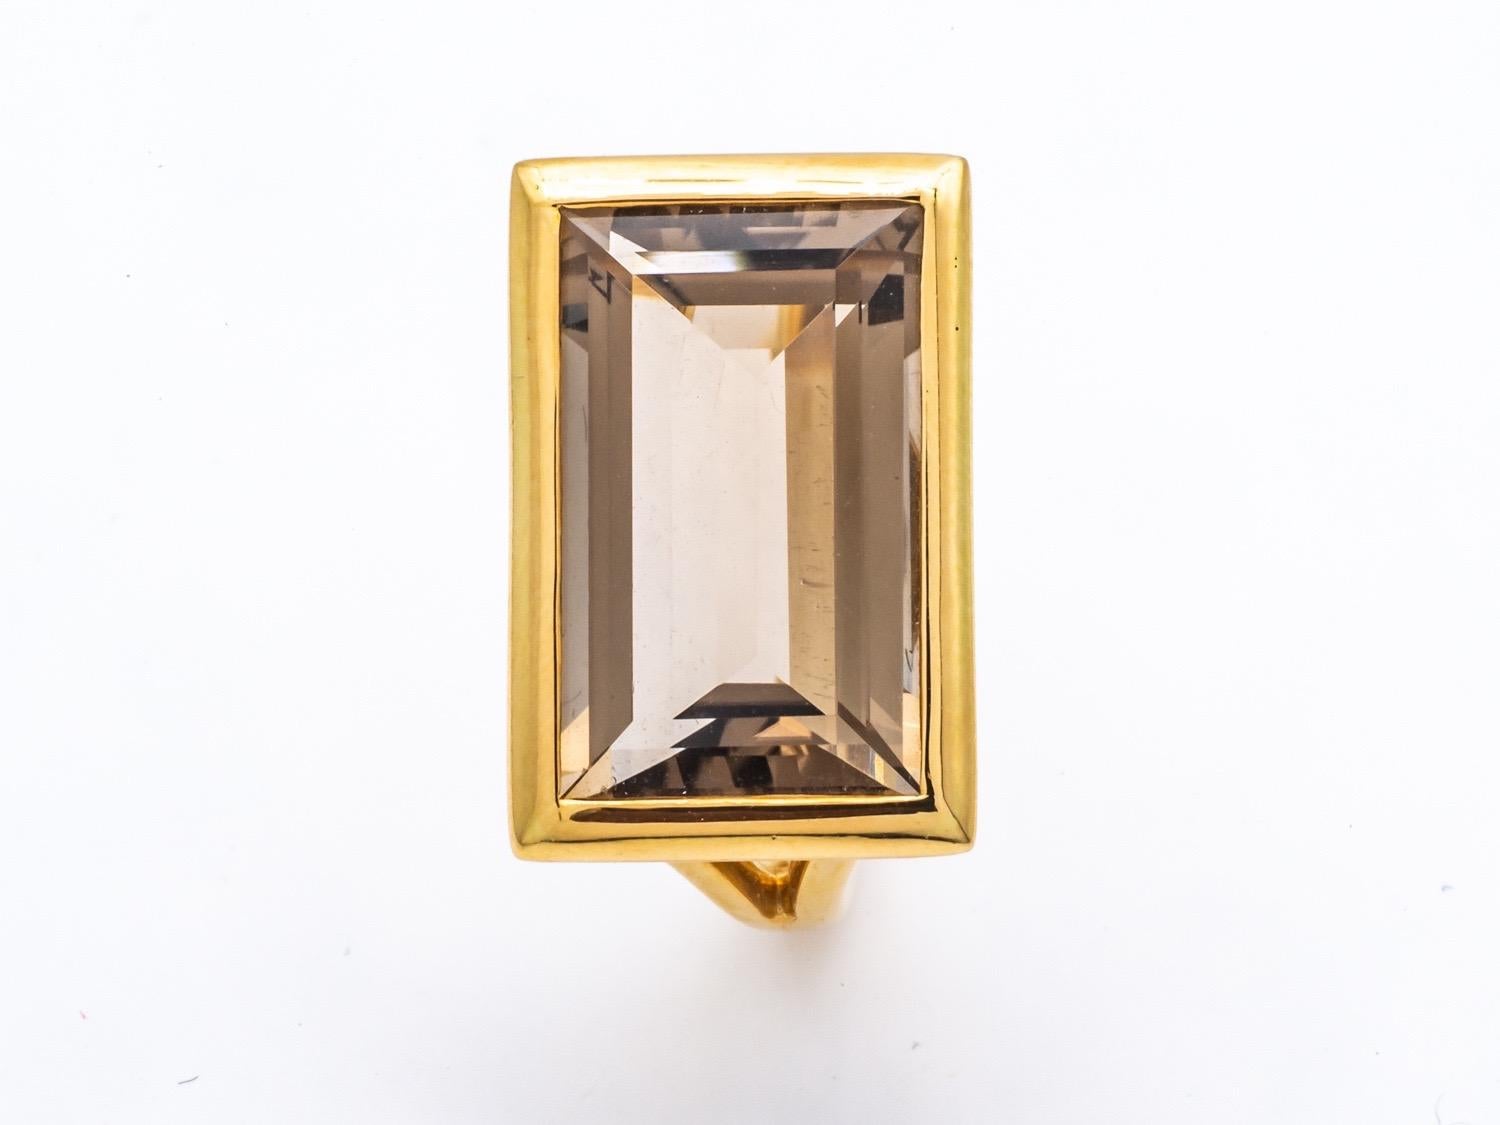 Art Deco Style Ring in 18K Yellow Gold set with an Emerald Size Smoked Quartz
the stone set closed gives all the modernity to this ring .
French size 53
 size US 6.75
weight of gold 7 grams